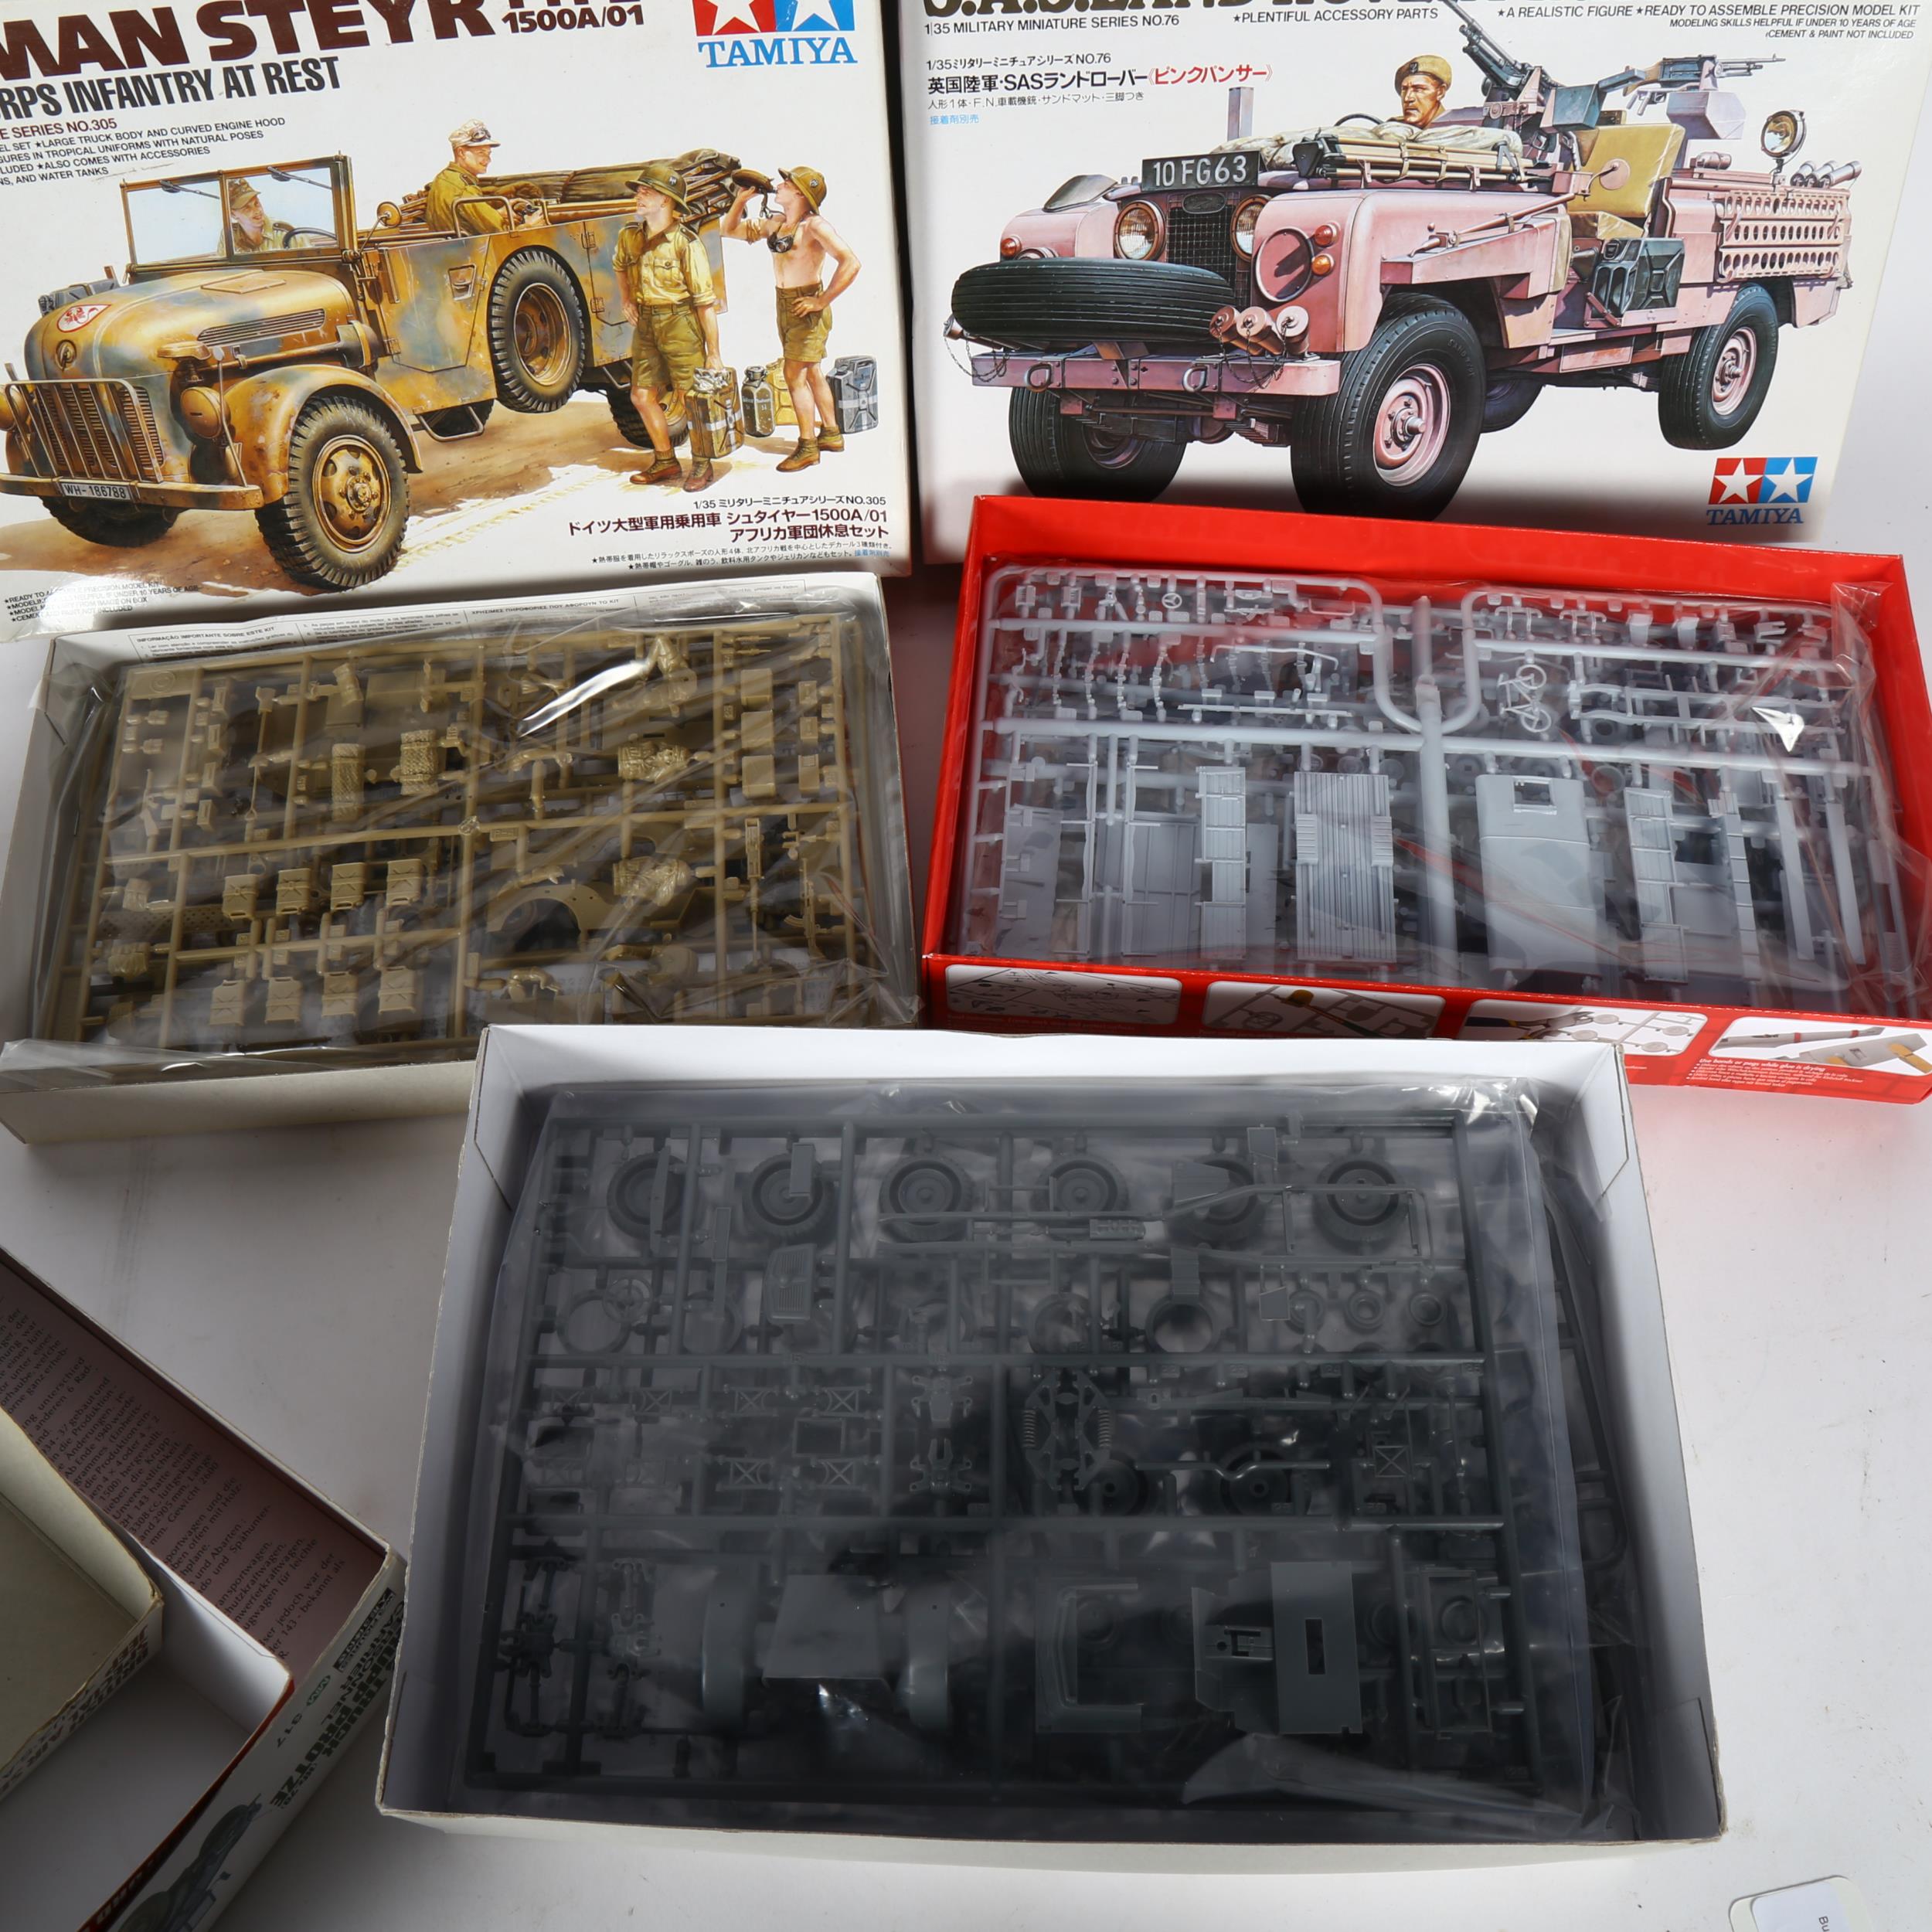 TAMIYA/AIRFIX - a quantity of model kits, unused, including British Special Air Service jeep, and - Bild 2 aus 2